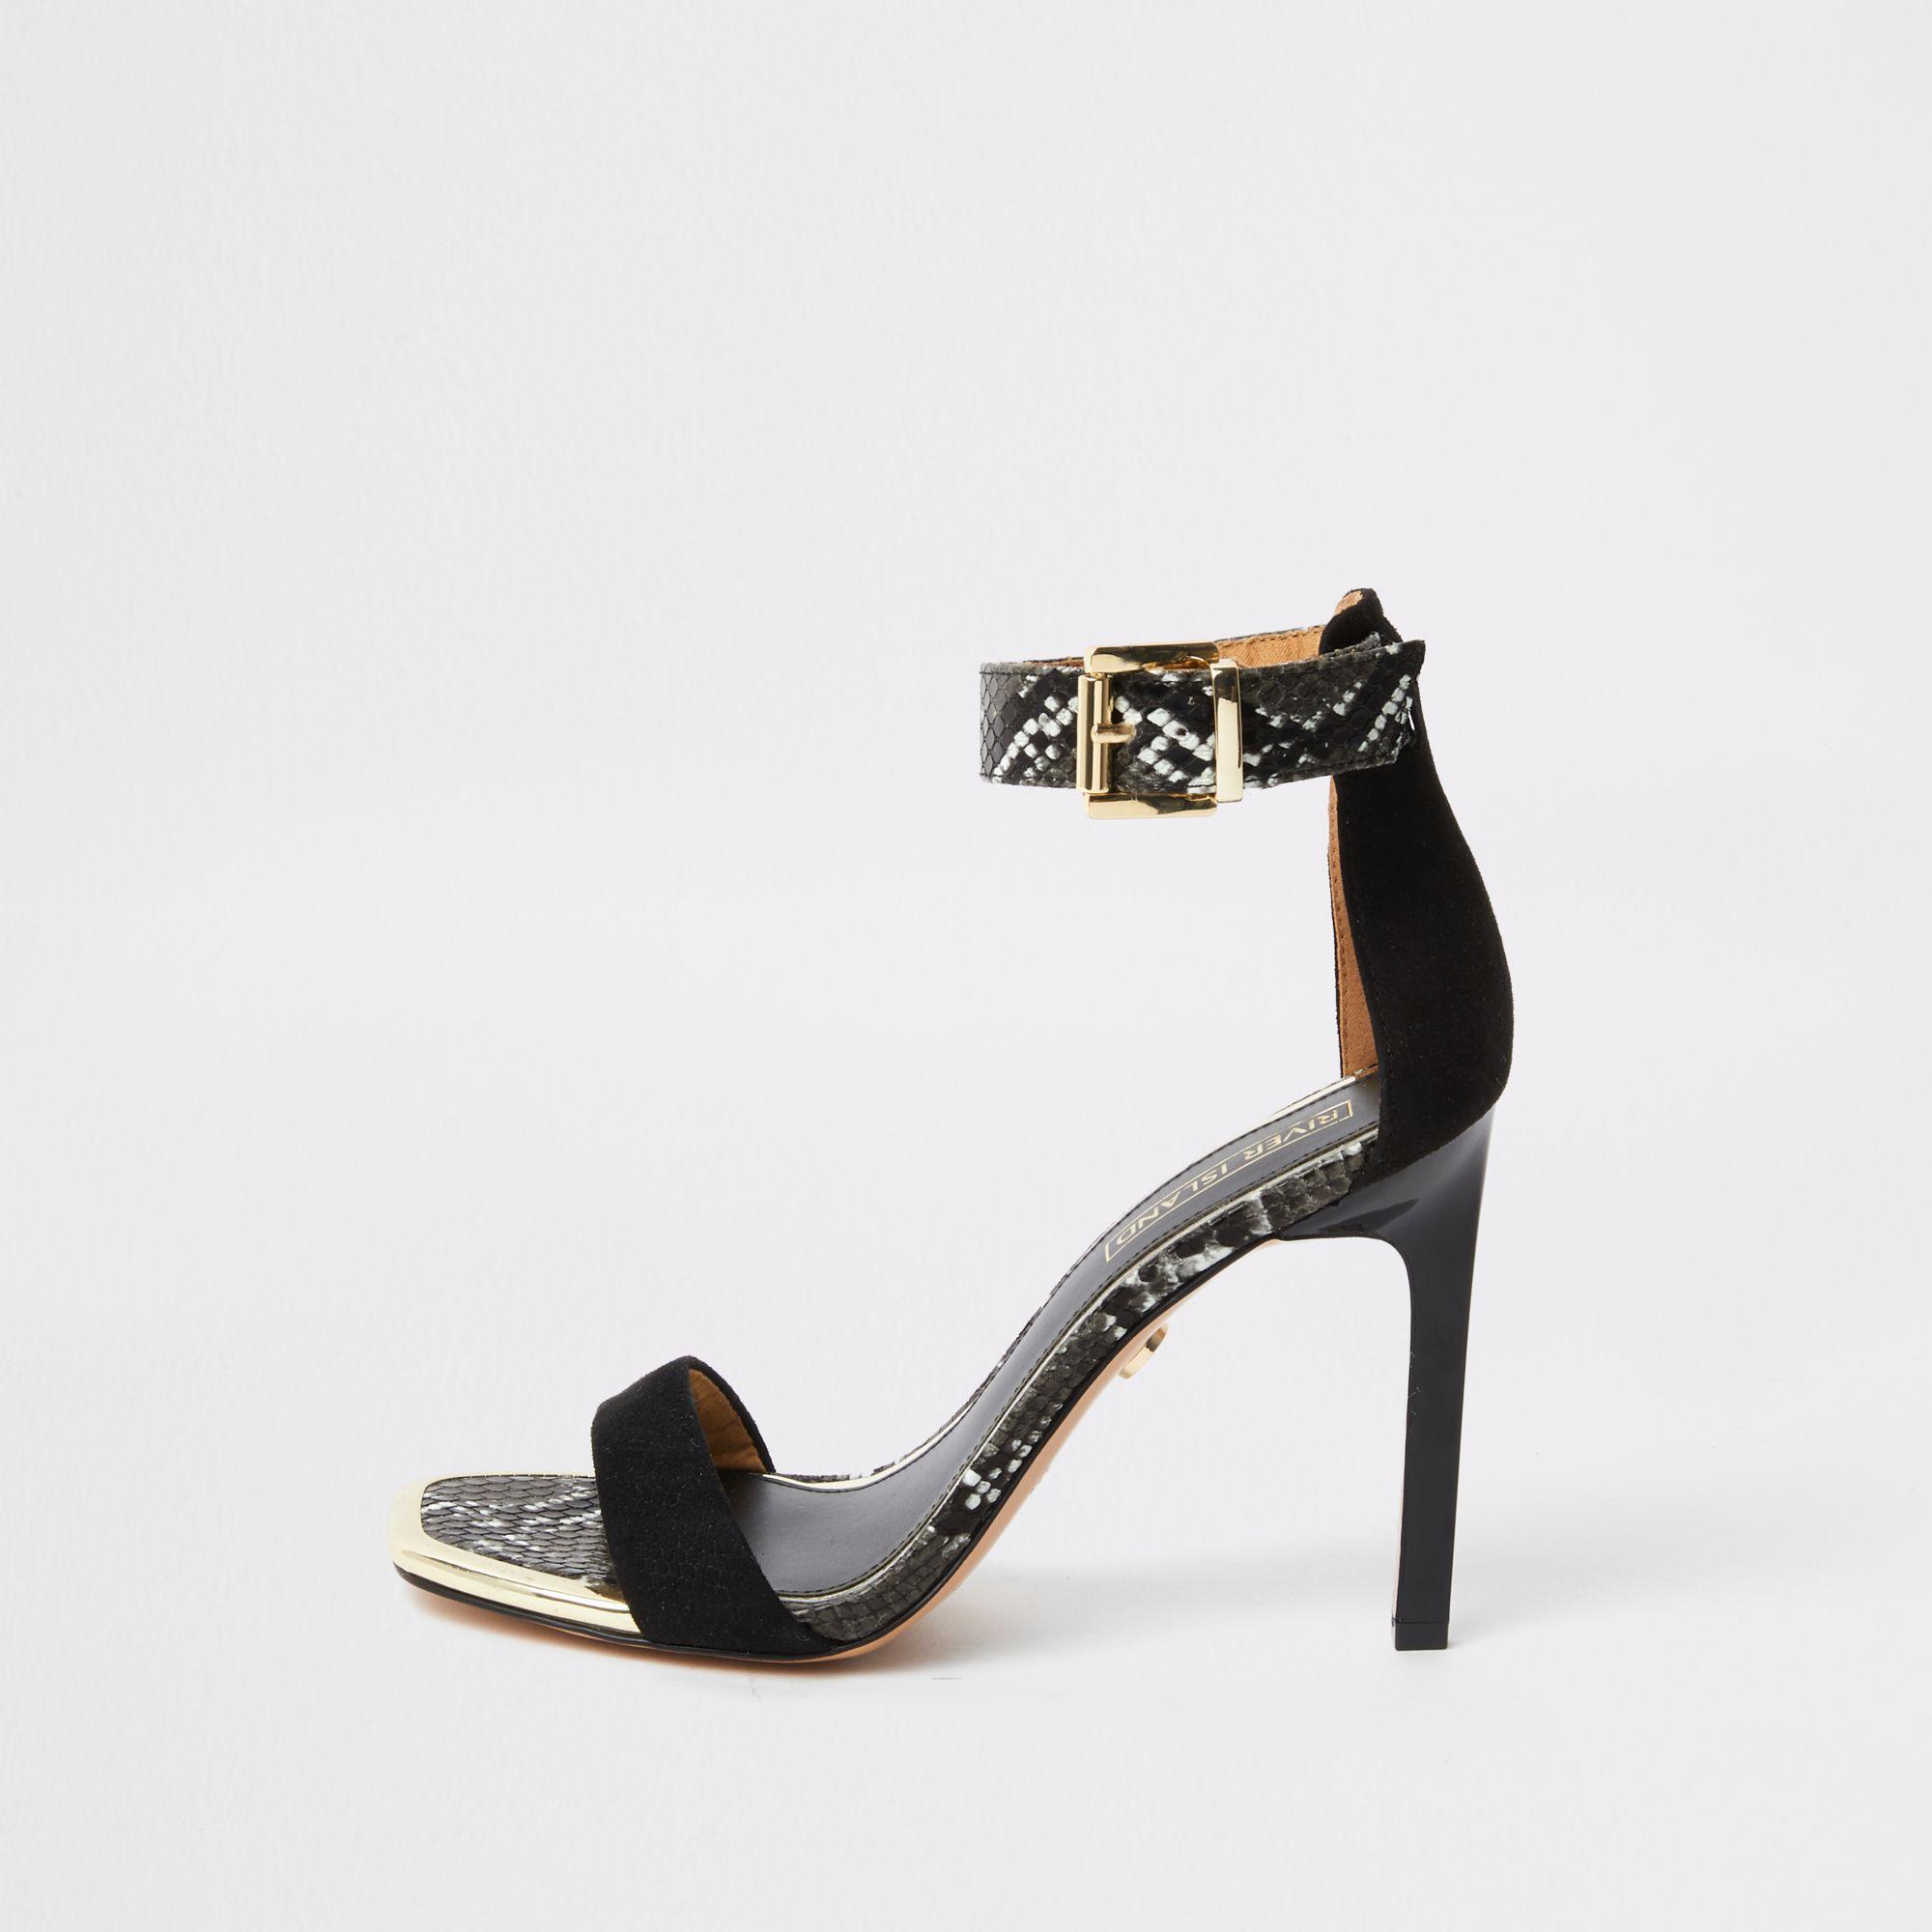 River Island Leather Barely There Snake Print Sandals in Black - Lyst